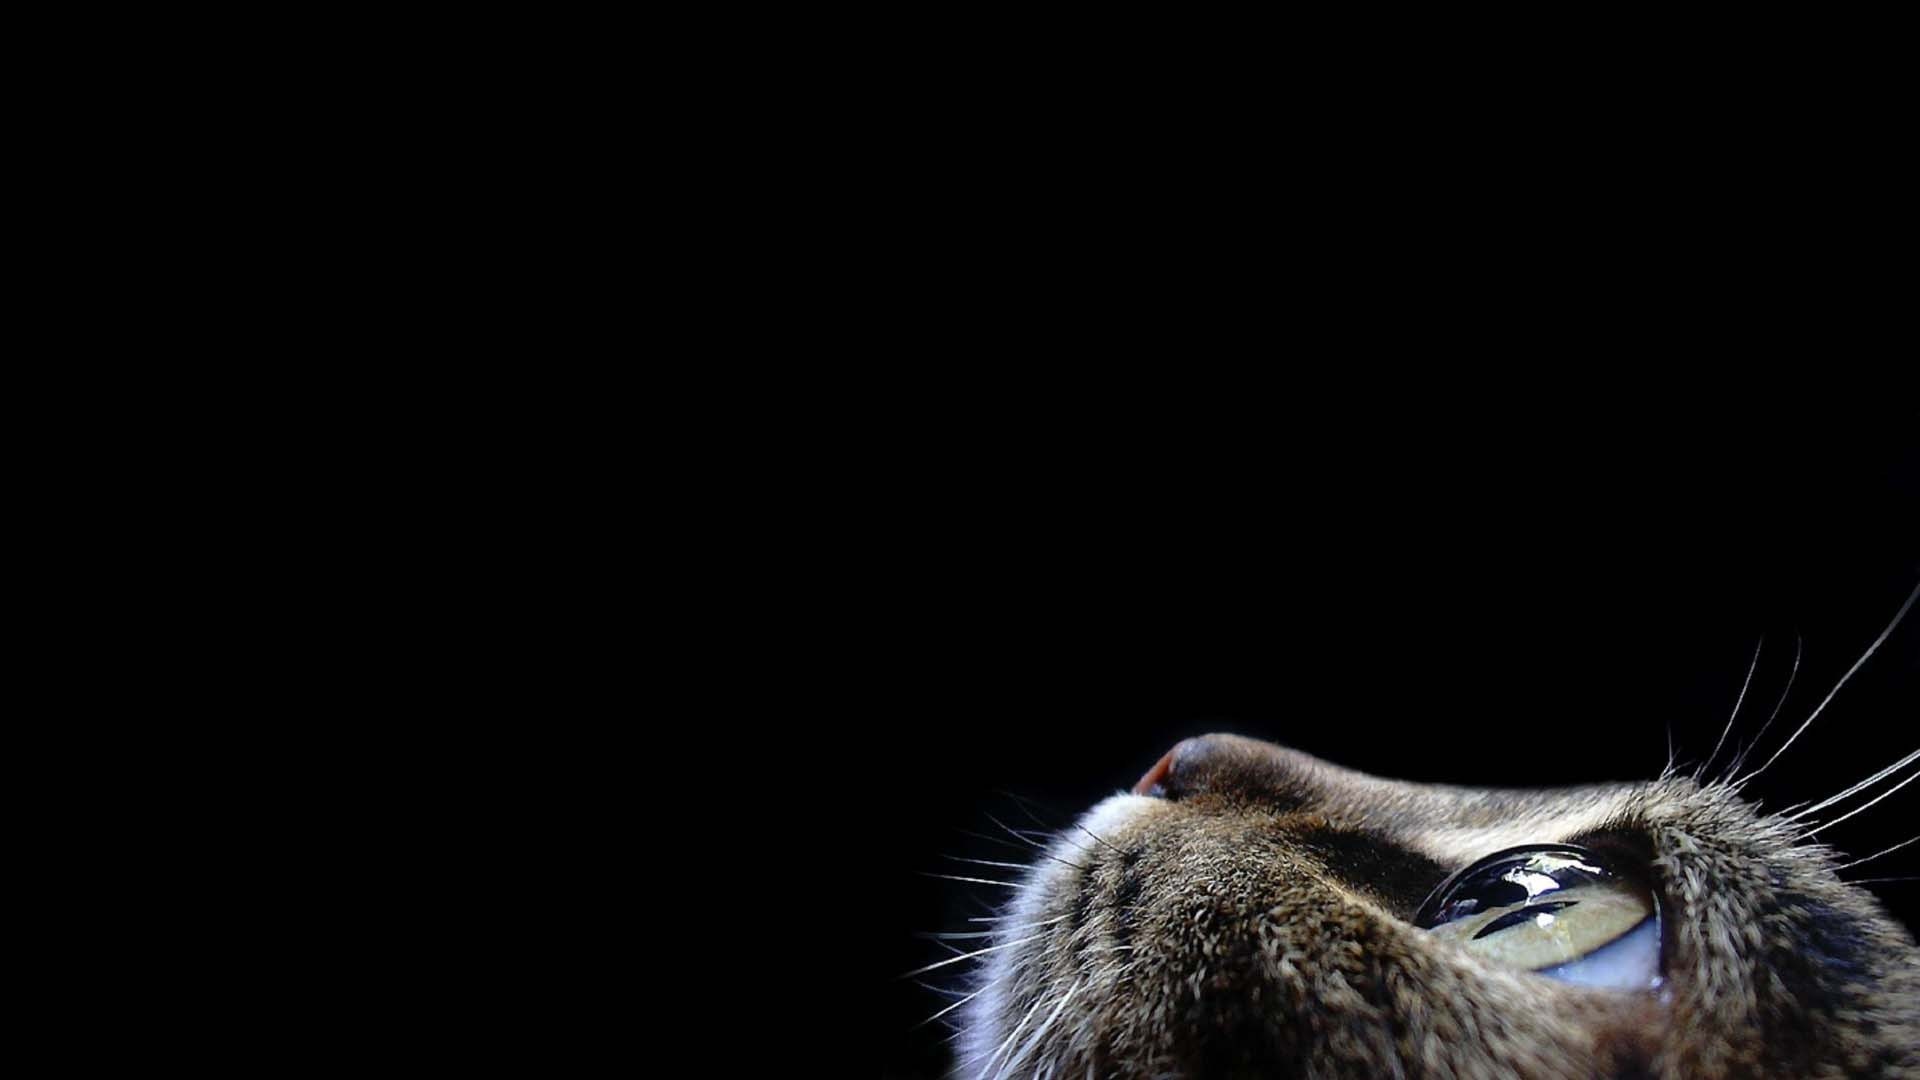 Most Amazing Cat Seen To The Top On A Black Background 4k Wallpaper